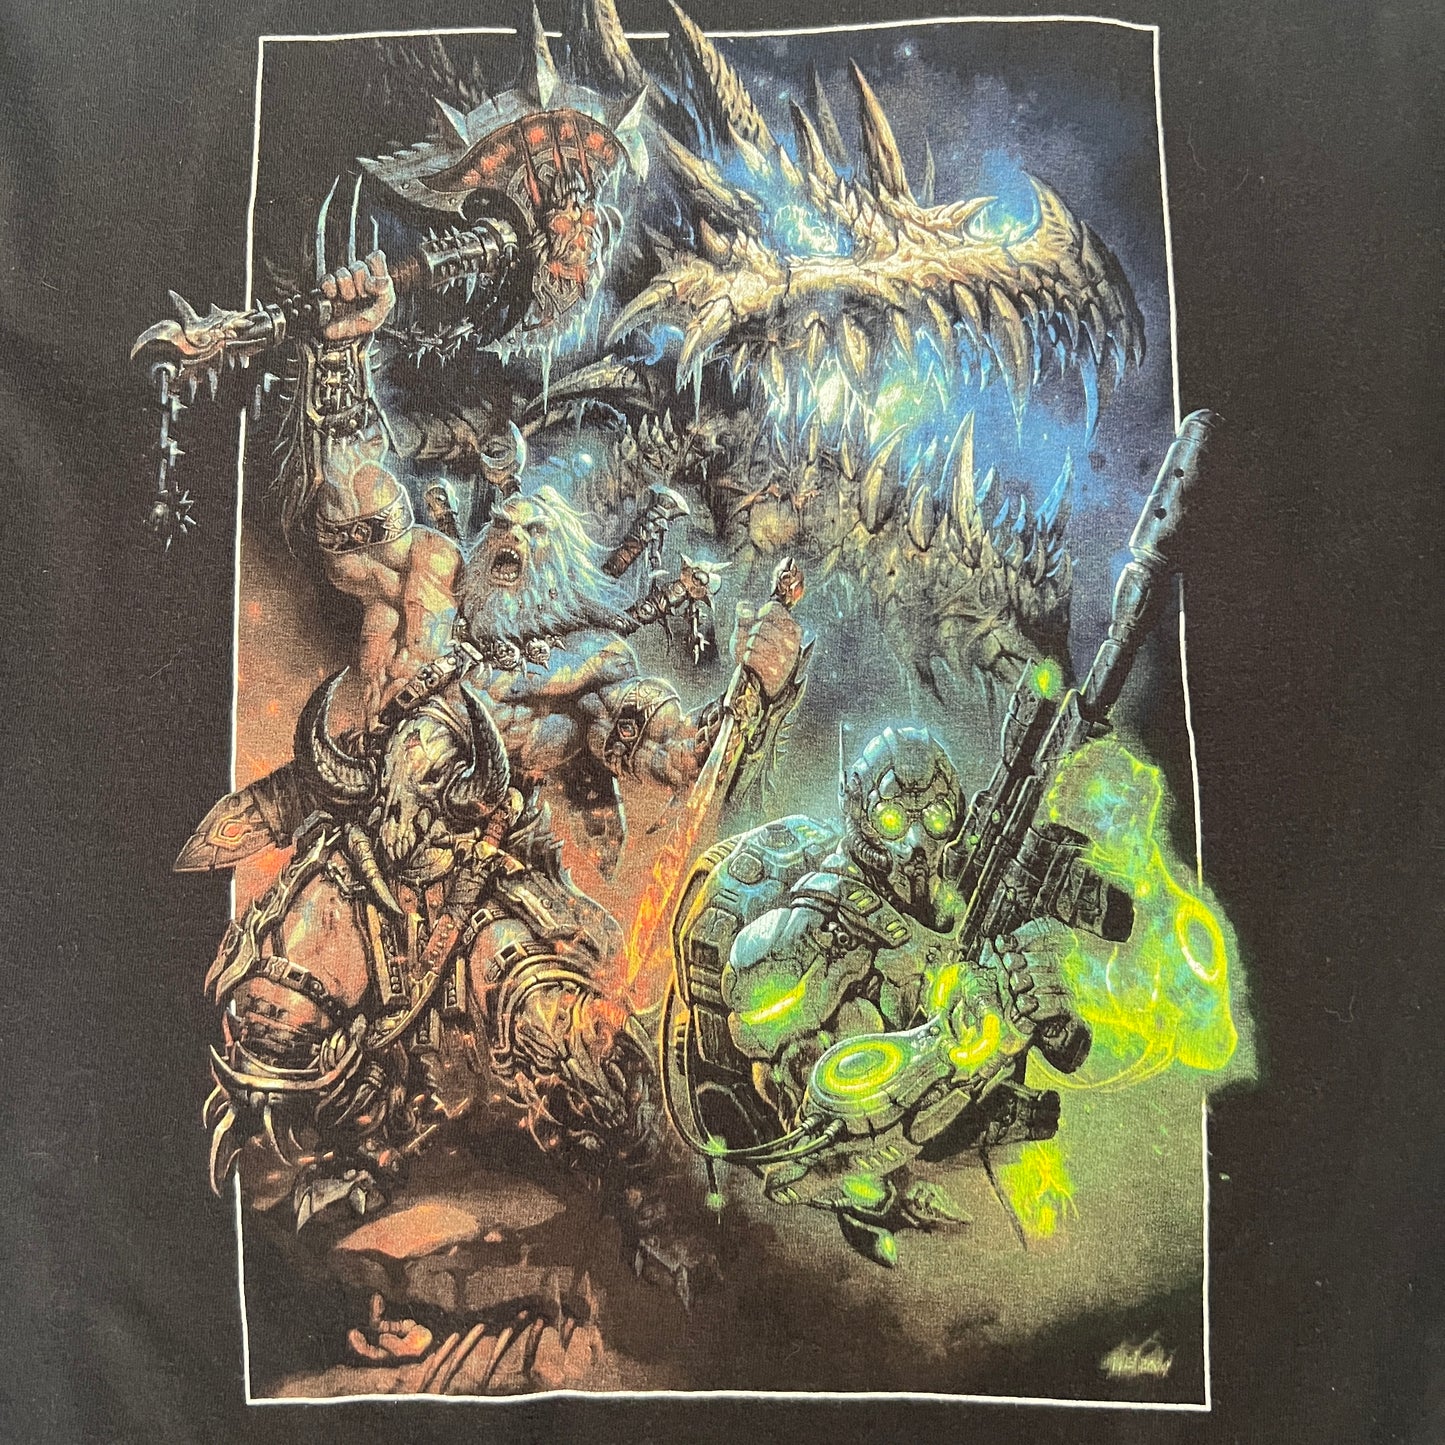 Pre-Owned Blizzard BlizzCon 2009 T-Shirt